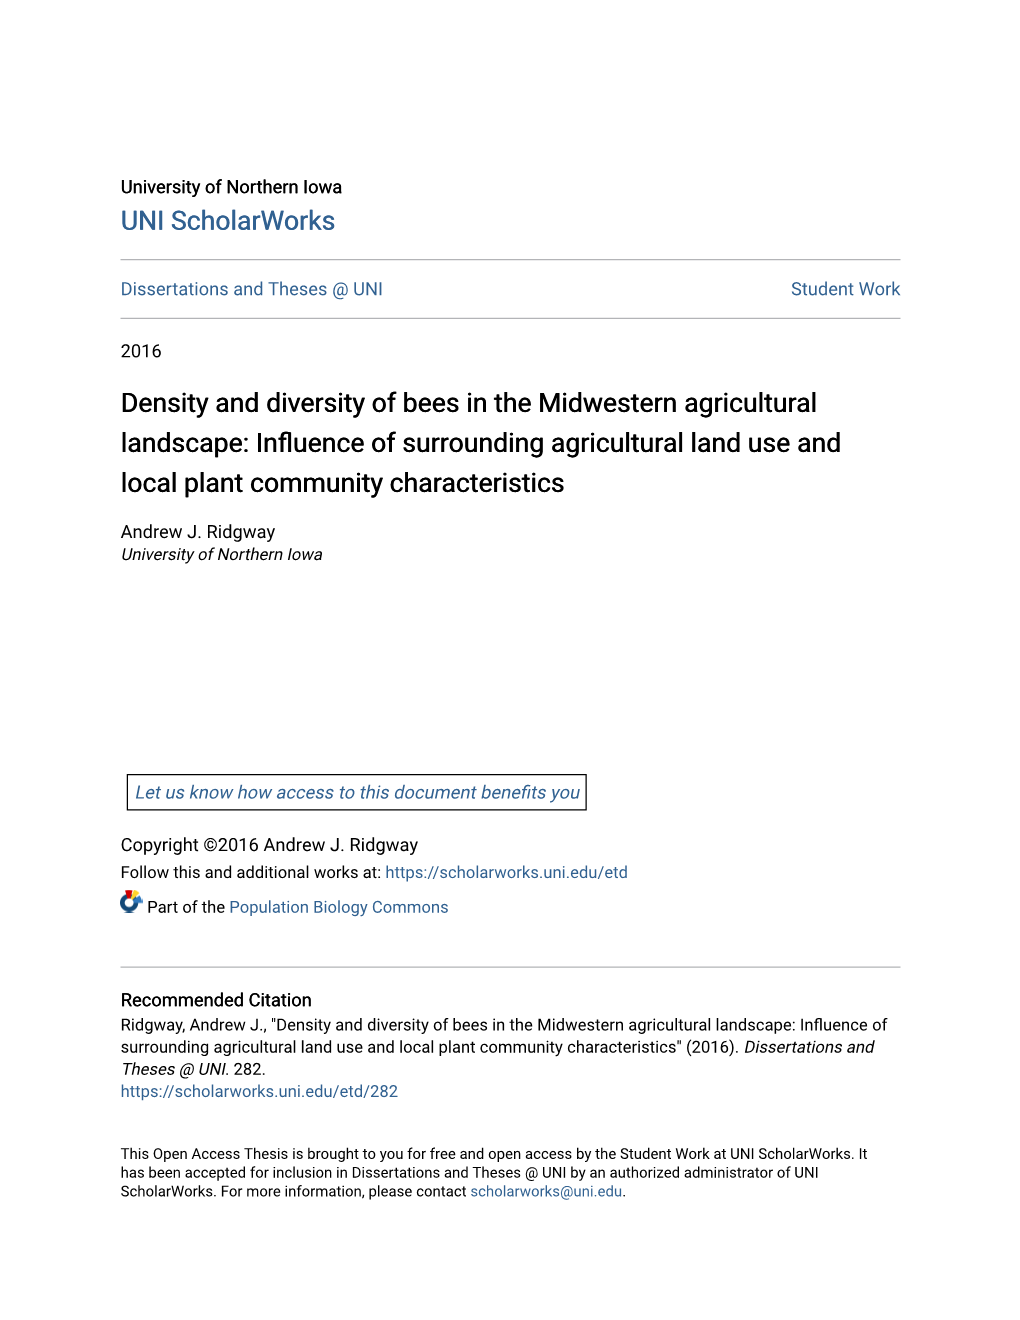 Density and Diversity of Bees in the Midwestern Agricultural Landscape: Influence of Surrounding Agricultural Land Use and Local Plant Community Characteristics